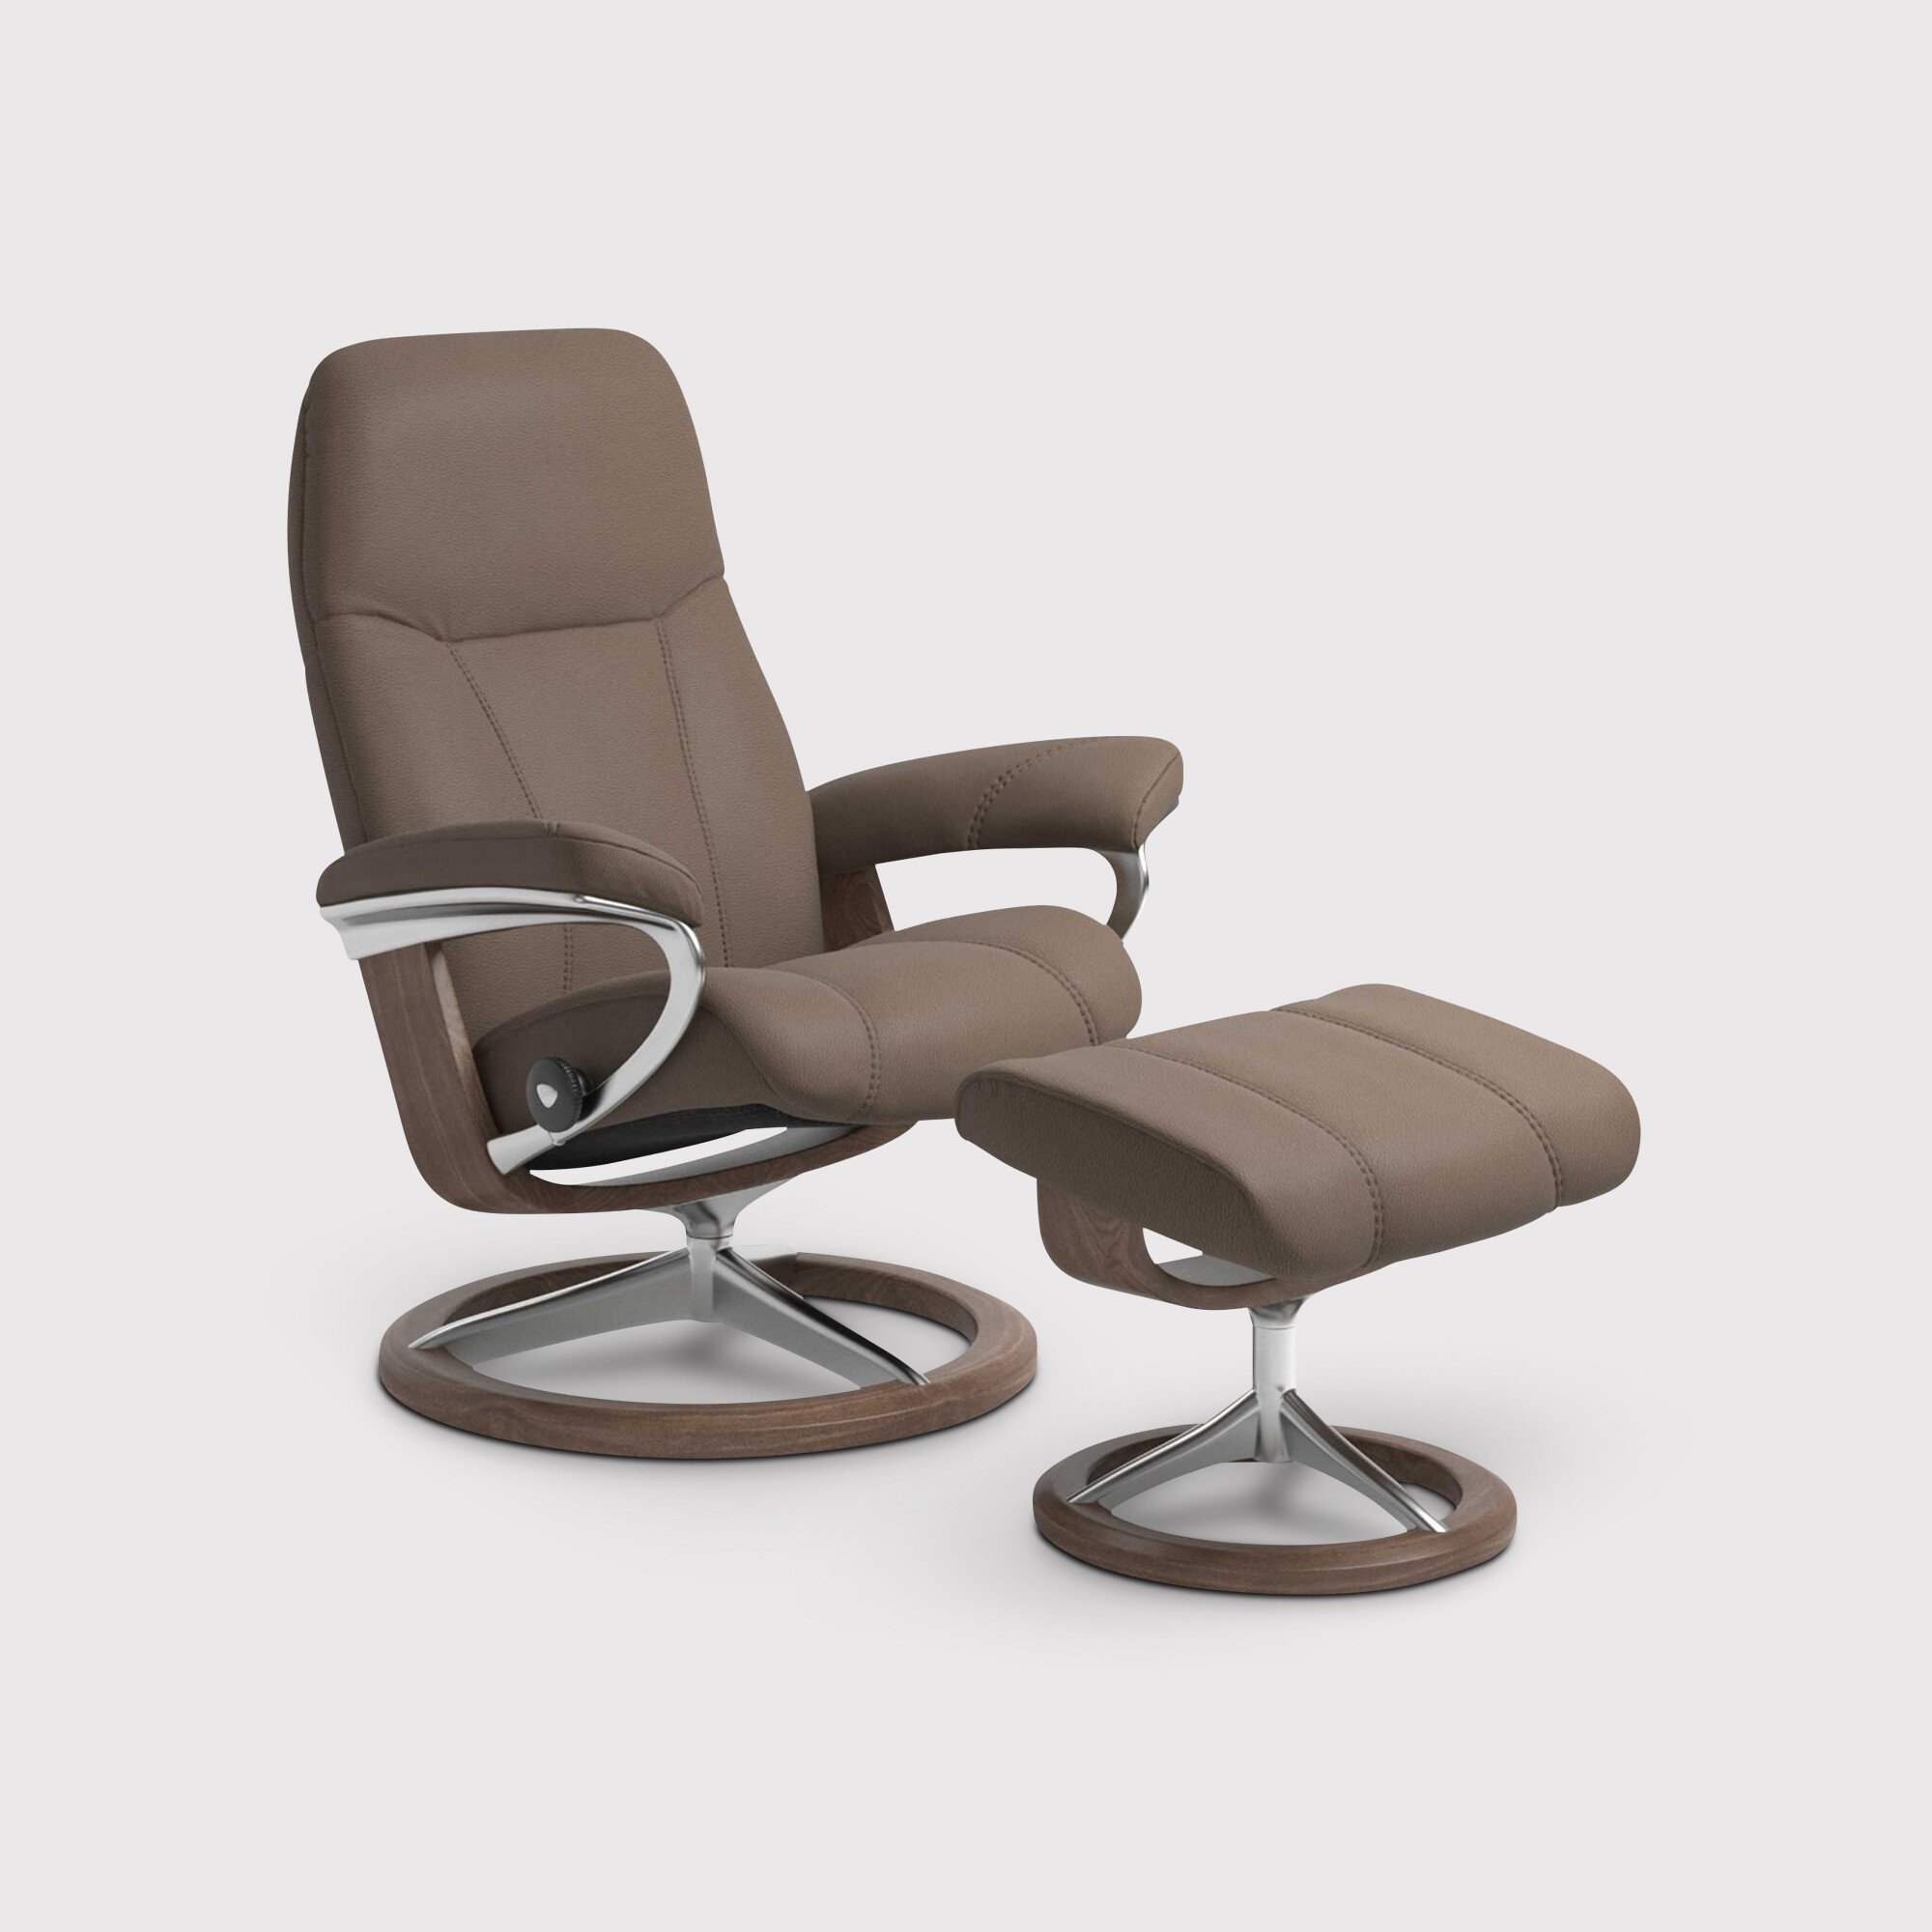 Stressless Consul Large Recliner Chair & Stool With Signature Base, Brown Leather | Barker & Stonehouse